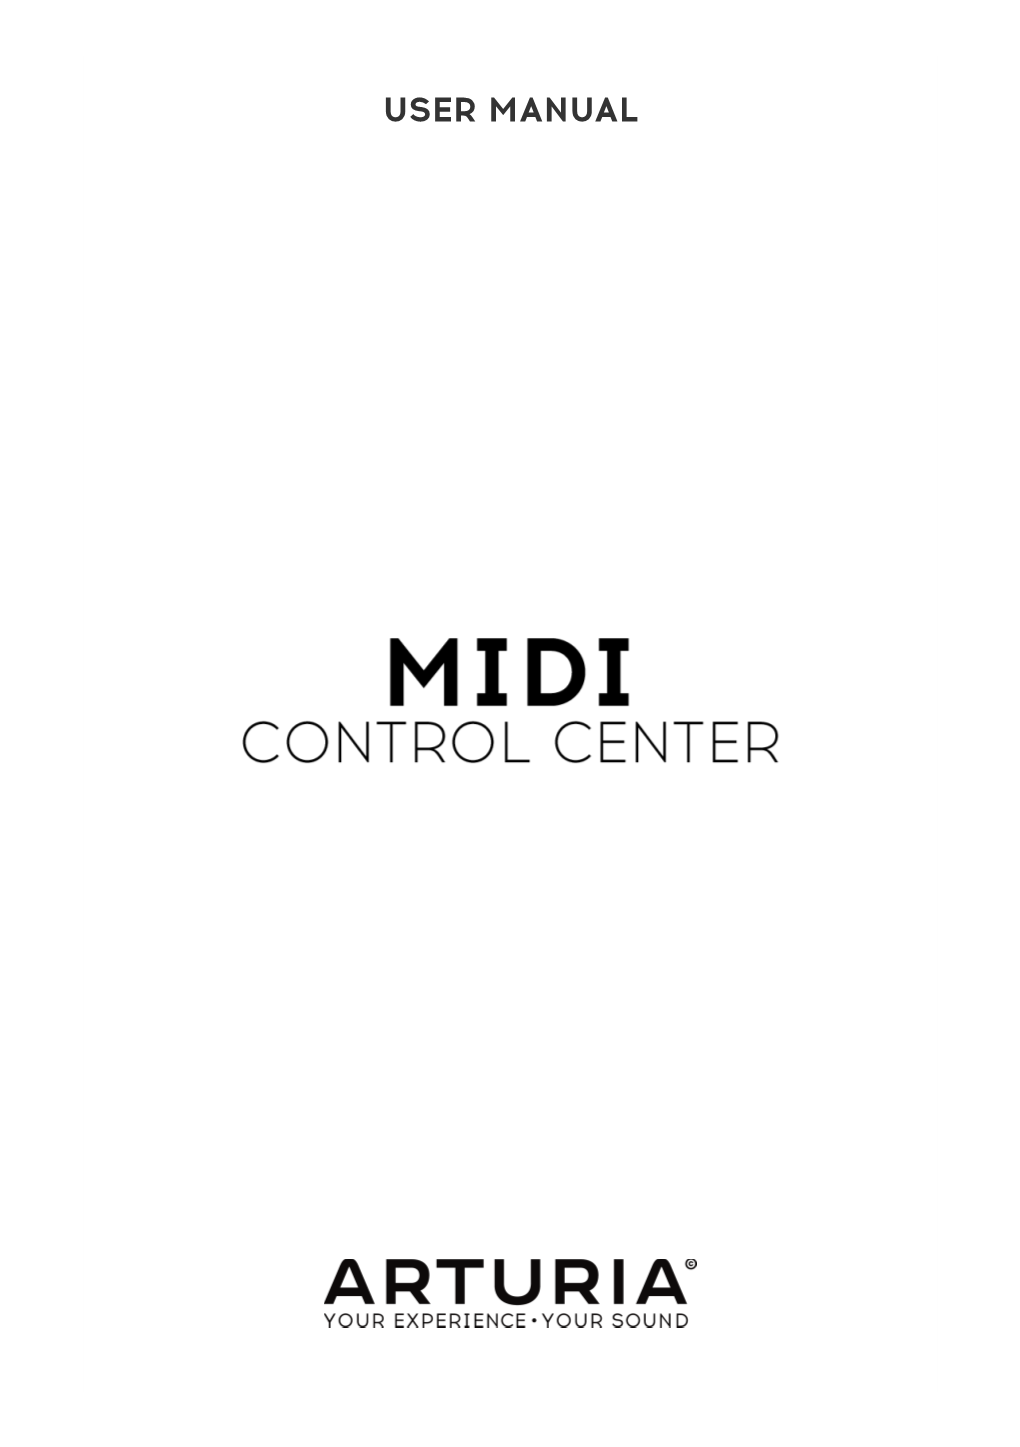 User Manual MIDI Control Center - Welcome to the MIDI Control Center! • Sequences/Patterns